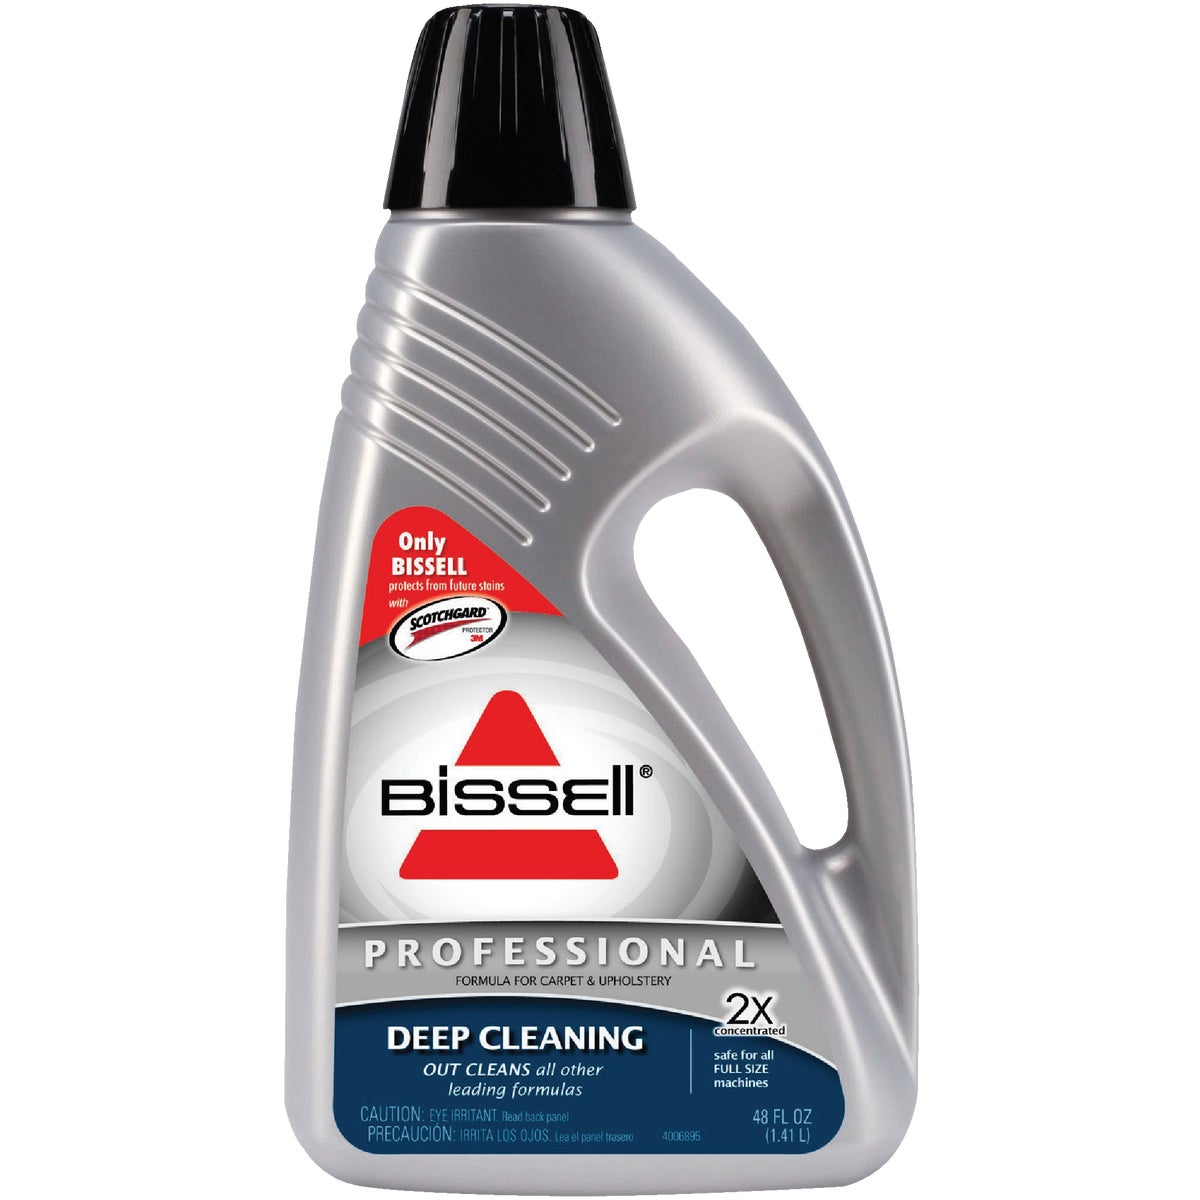 Item 635799, 2X professional deep cleaning formula removes soil, stains, odors, and 